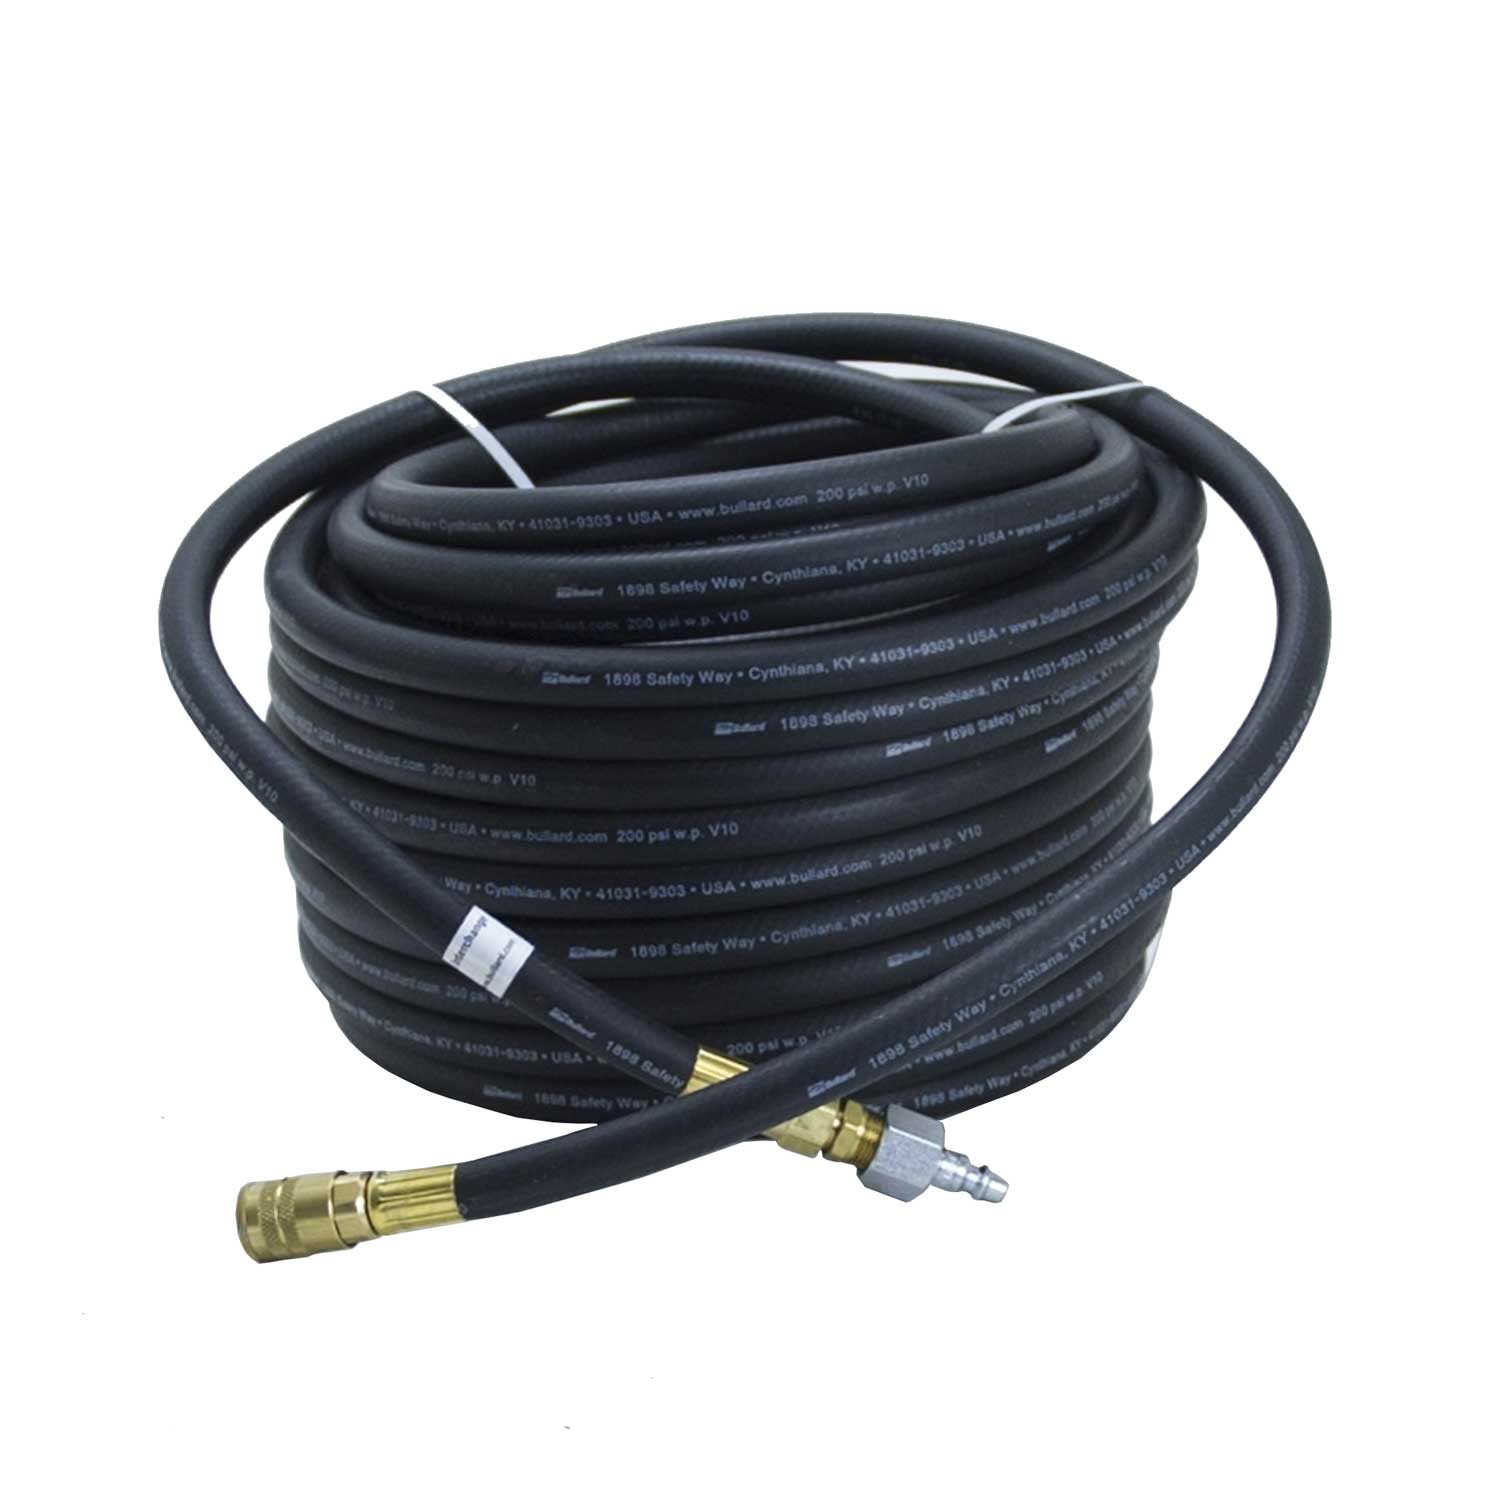 5458 - Air Supply Hose V10 3/8"ID Extension 100 ft. (use for compressed air) - PURspray